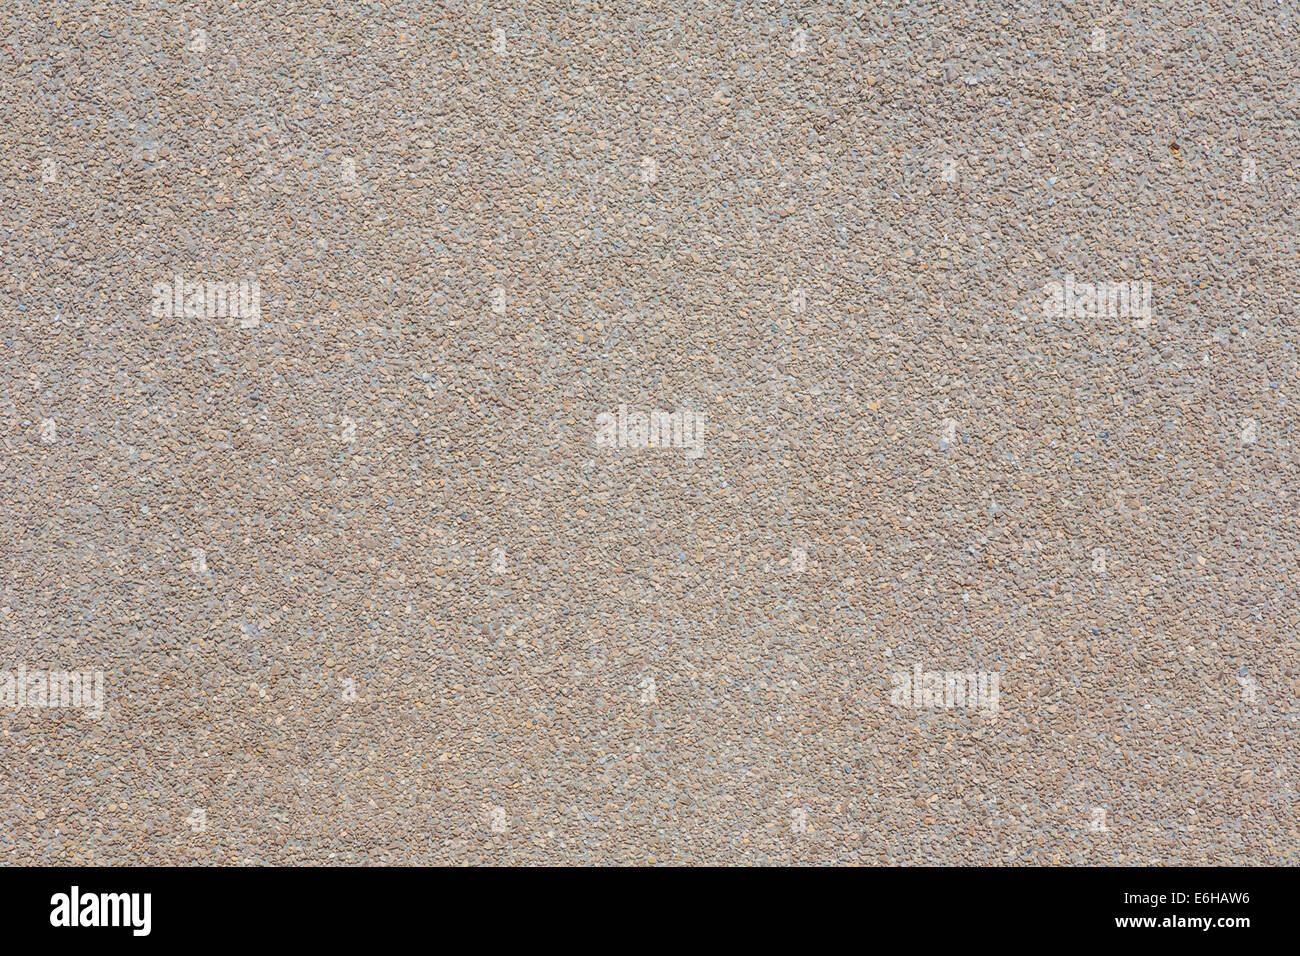 Close up of exposed aggregate concrete wall panel with brown colored concrete Stock Photo